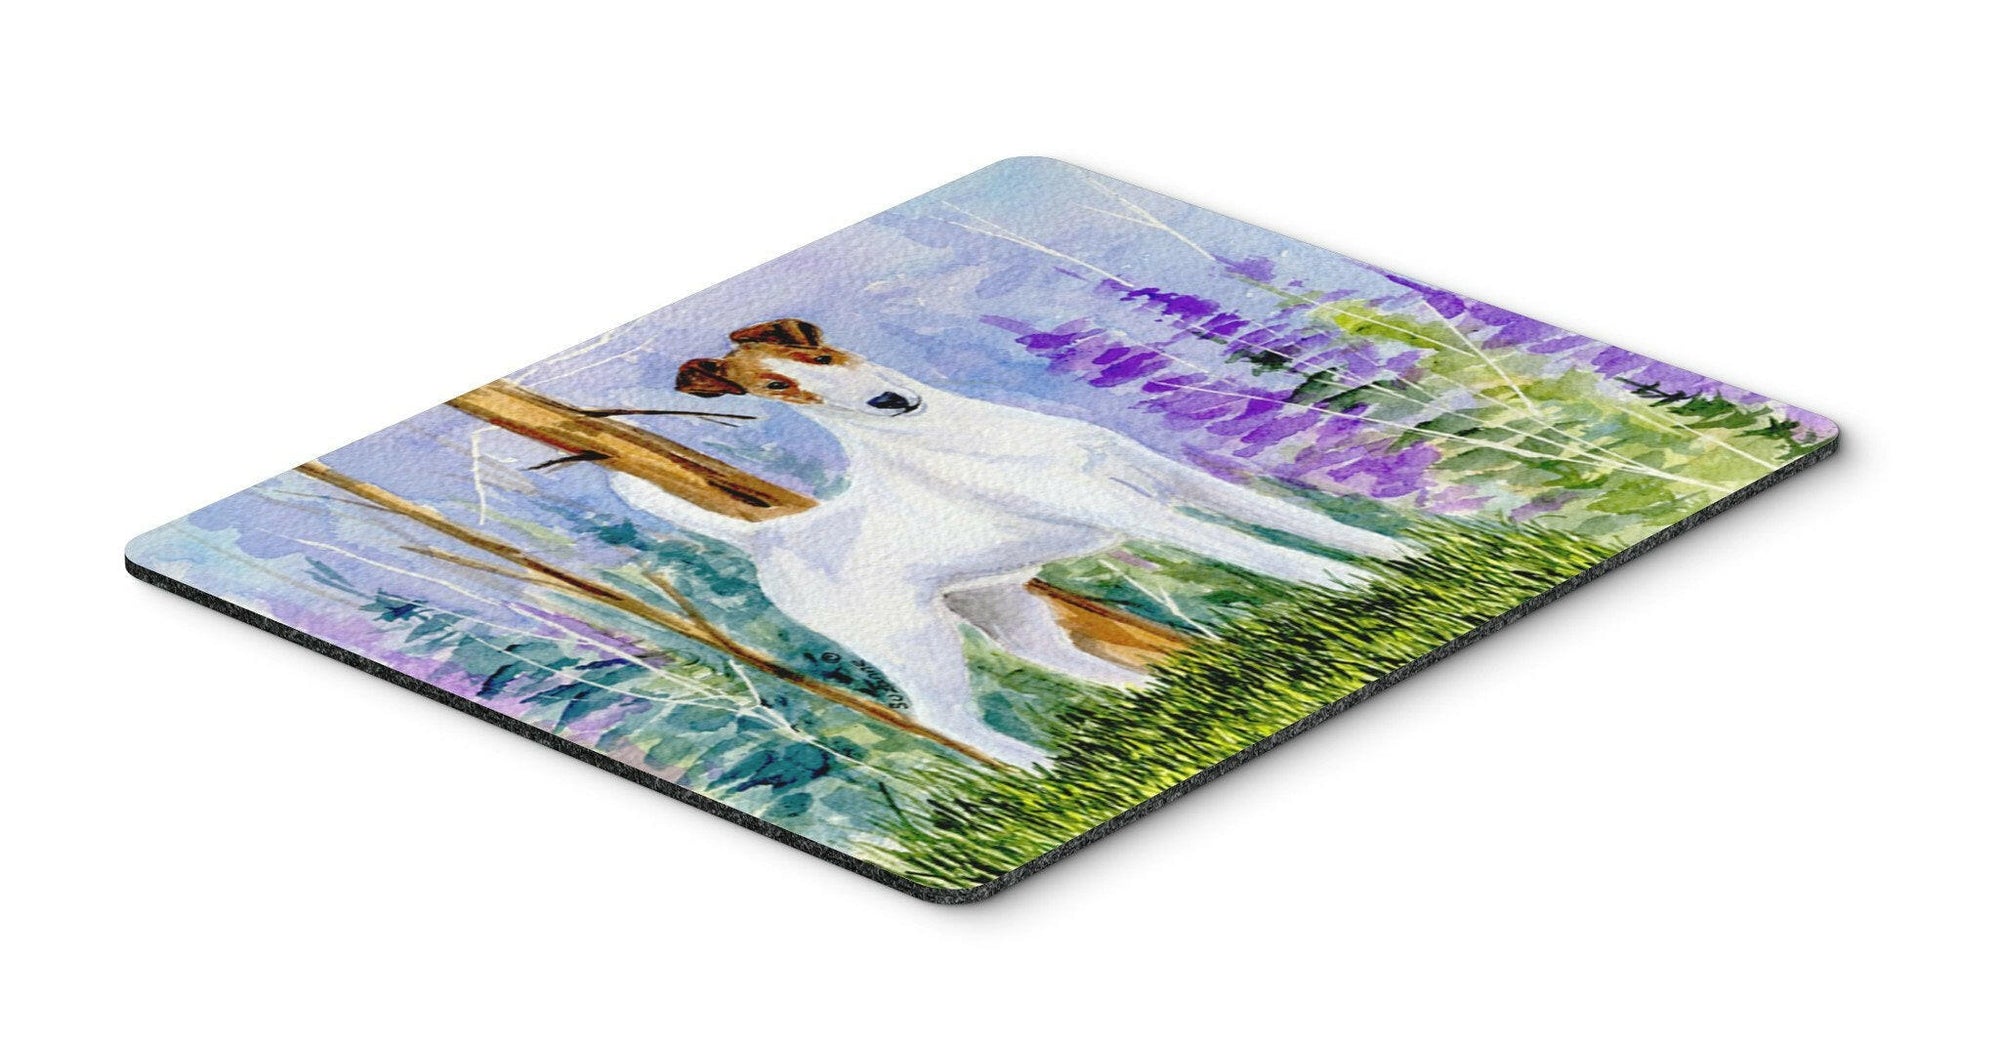 Jack Russell Terrier Mouse pad, hot pad, or trivet by Caroline's Treasures